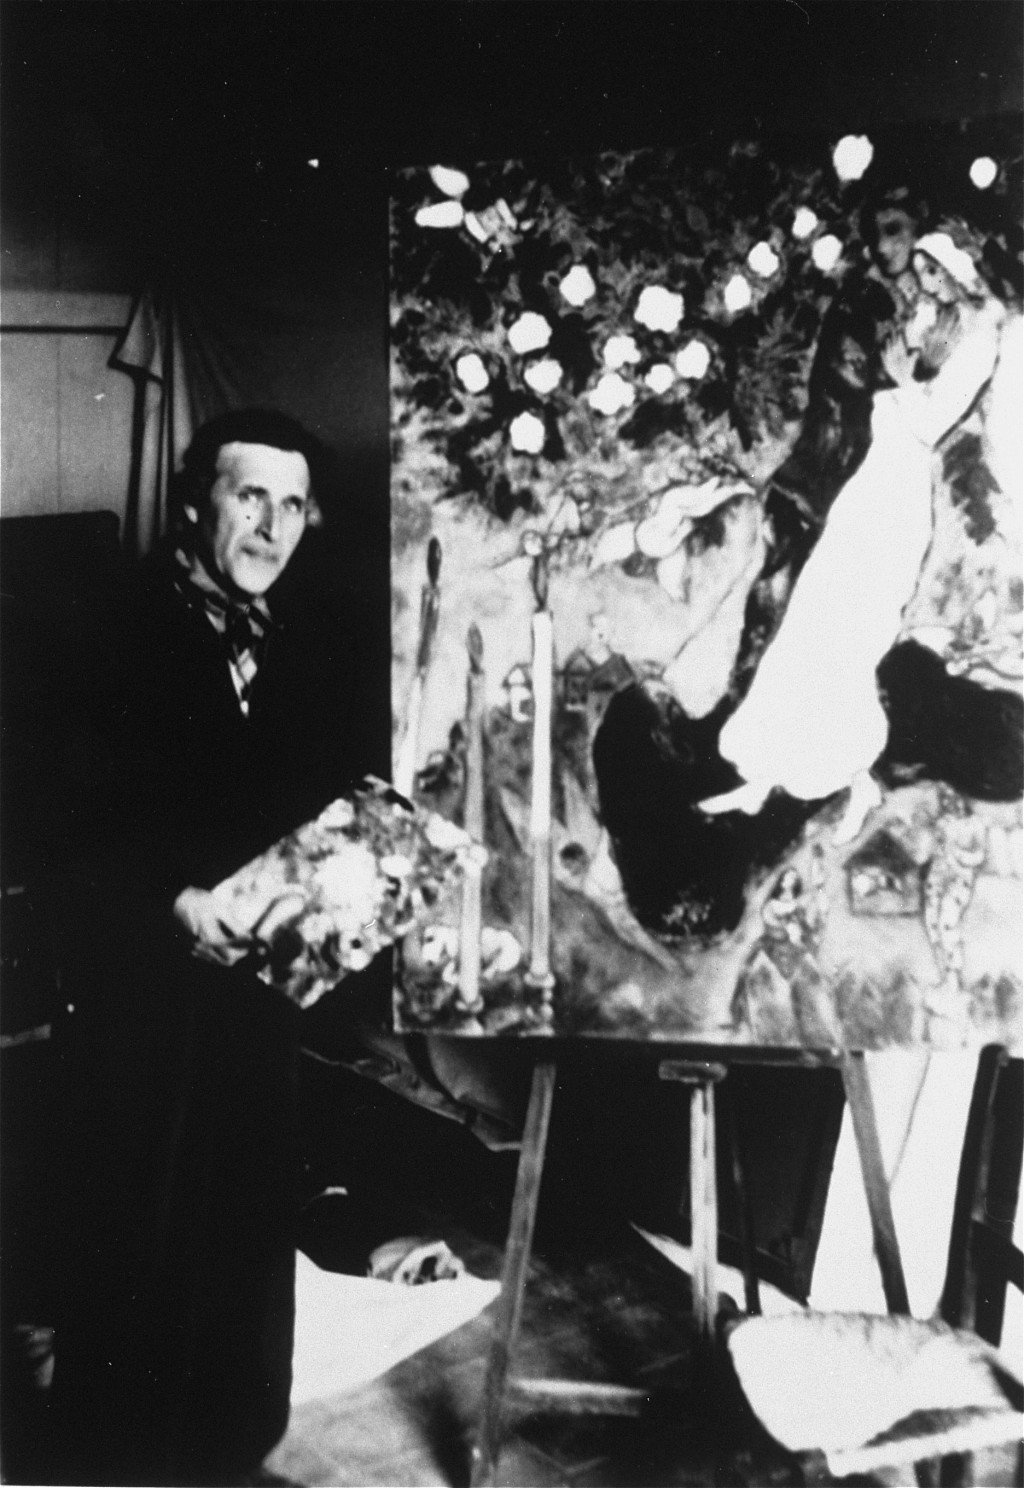 Marc Chagall, the Russian Jewish artist, at work in his studio in southern France. [LCID: 10116]